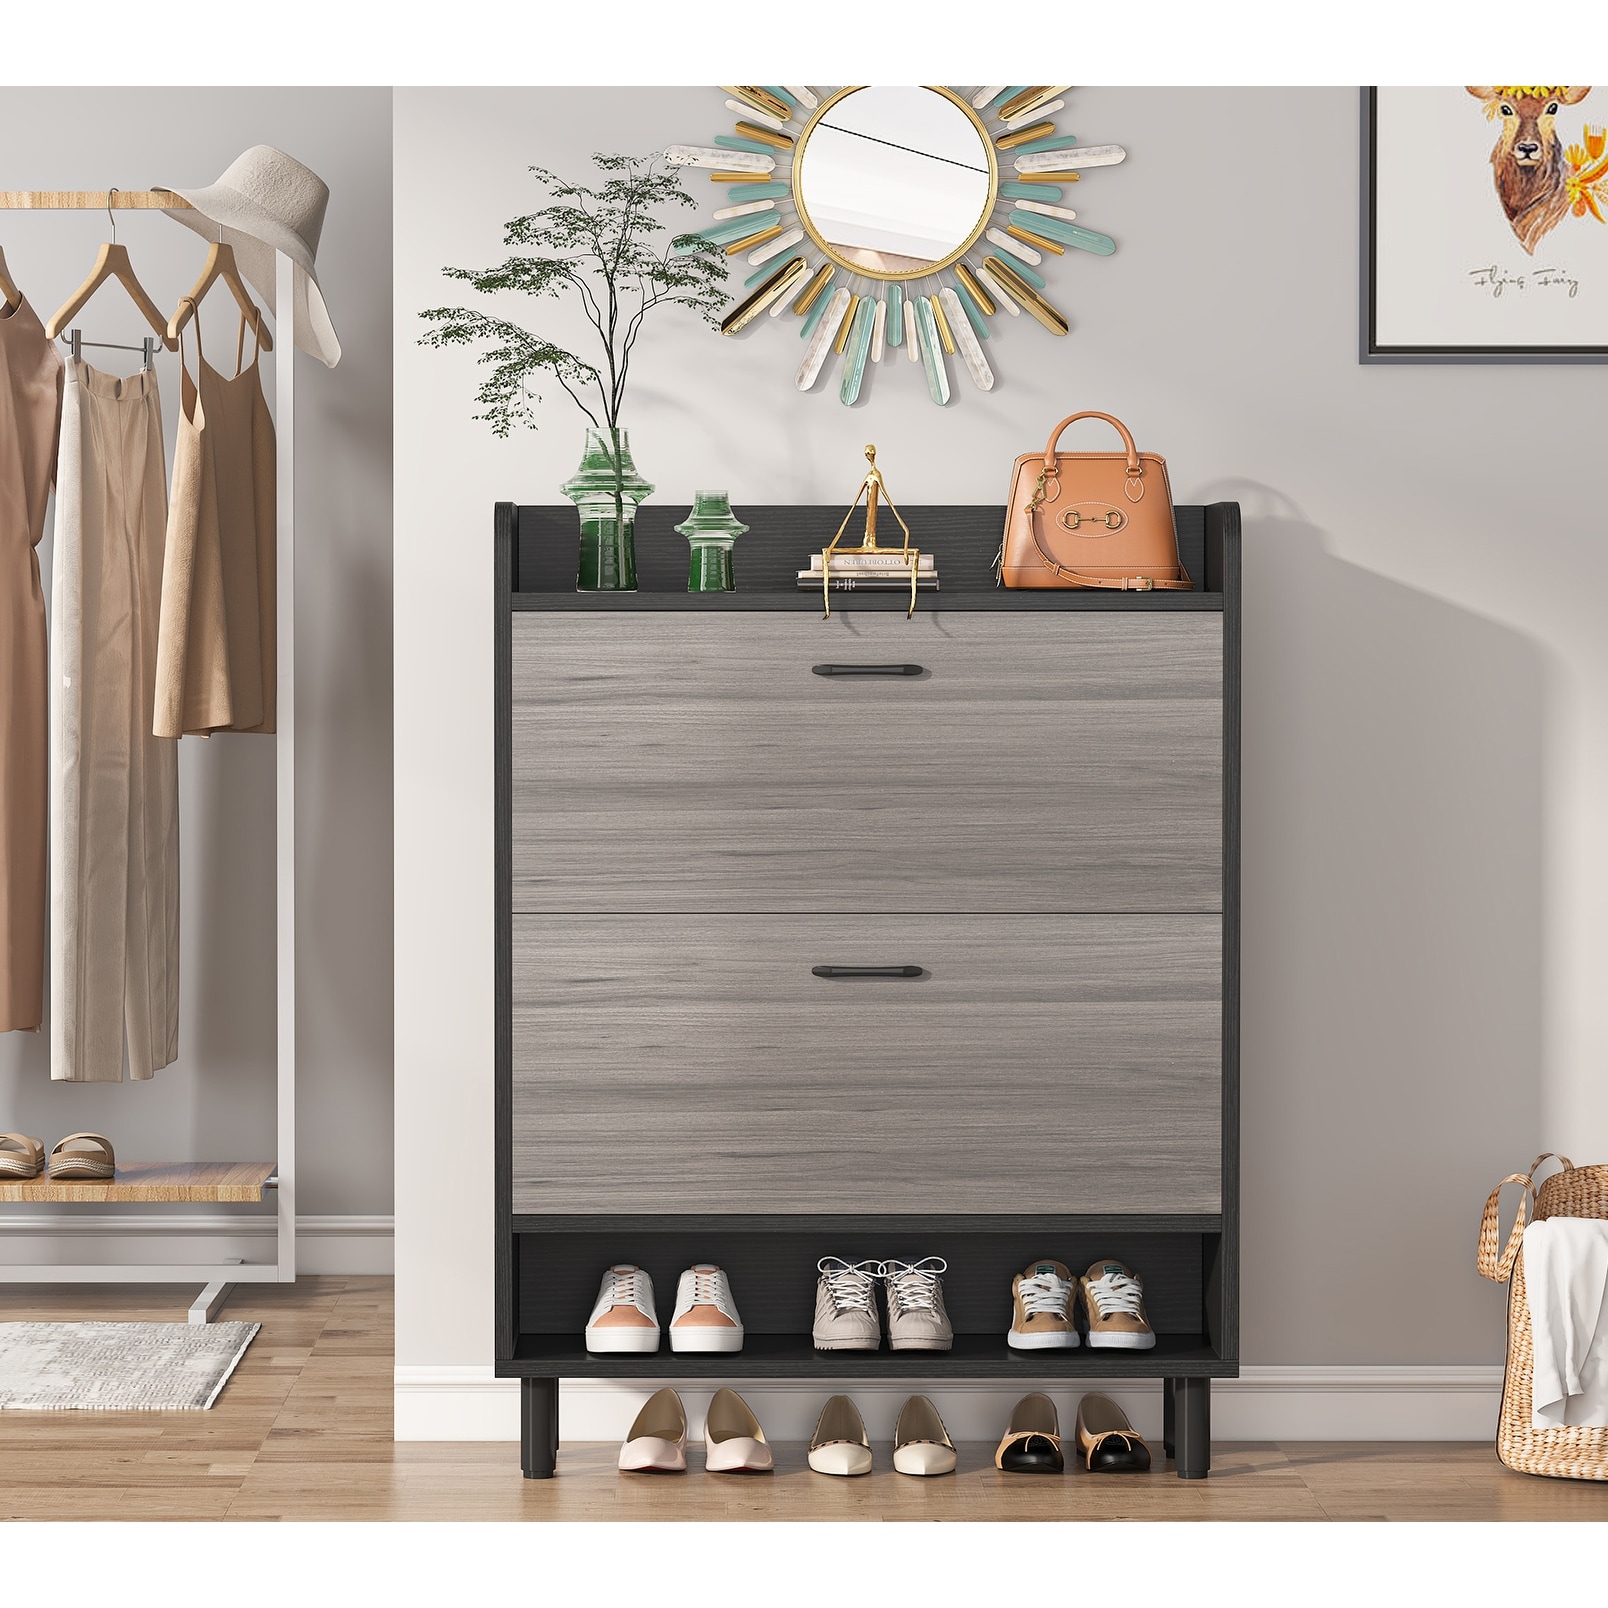 https://ak1.ostkcdn.com/images/products/is/images/direct/bd3852a87c3a453ef5355e913c14e5bde2c42dec/Shoe-Storage-Storage%2C-Freestanding-Shoe-Cabinet-with-2-Drawers-and-Open-Shelves-for-Entryway.jpg